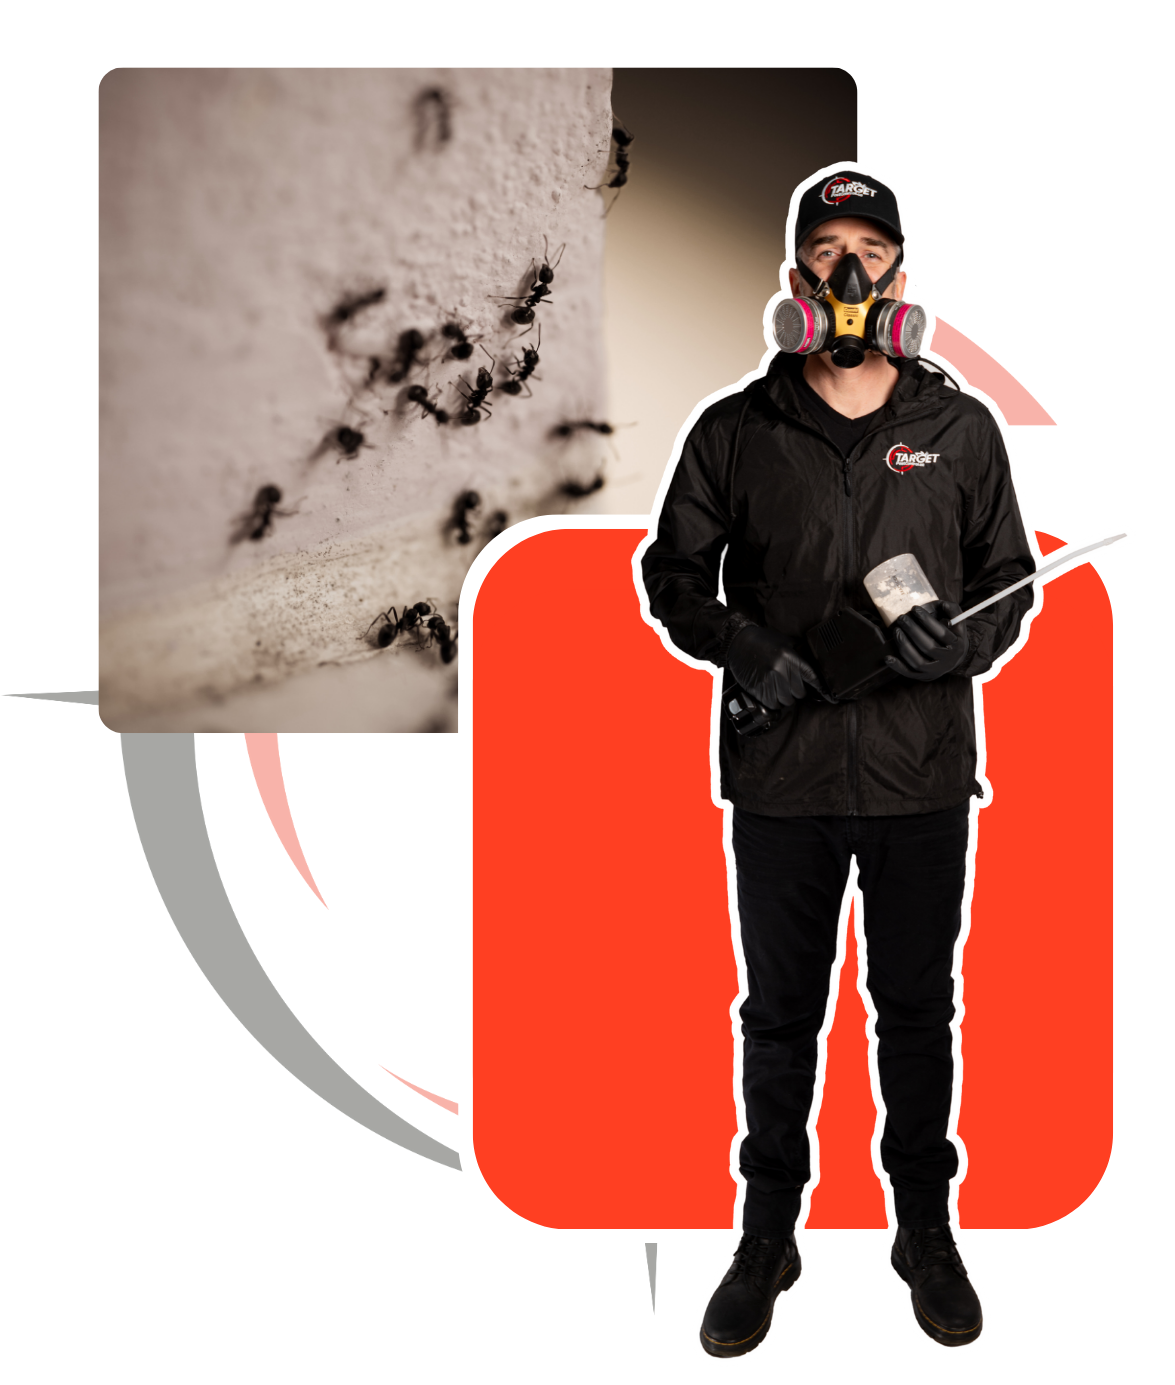 A man wearing a gas mask stands next to a picture of ants on a wall